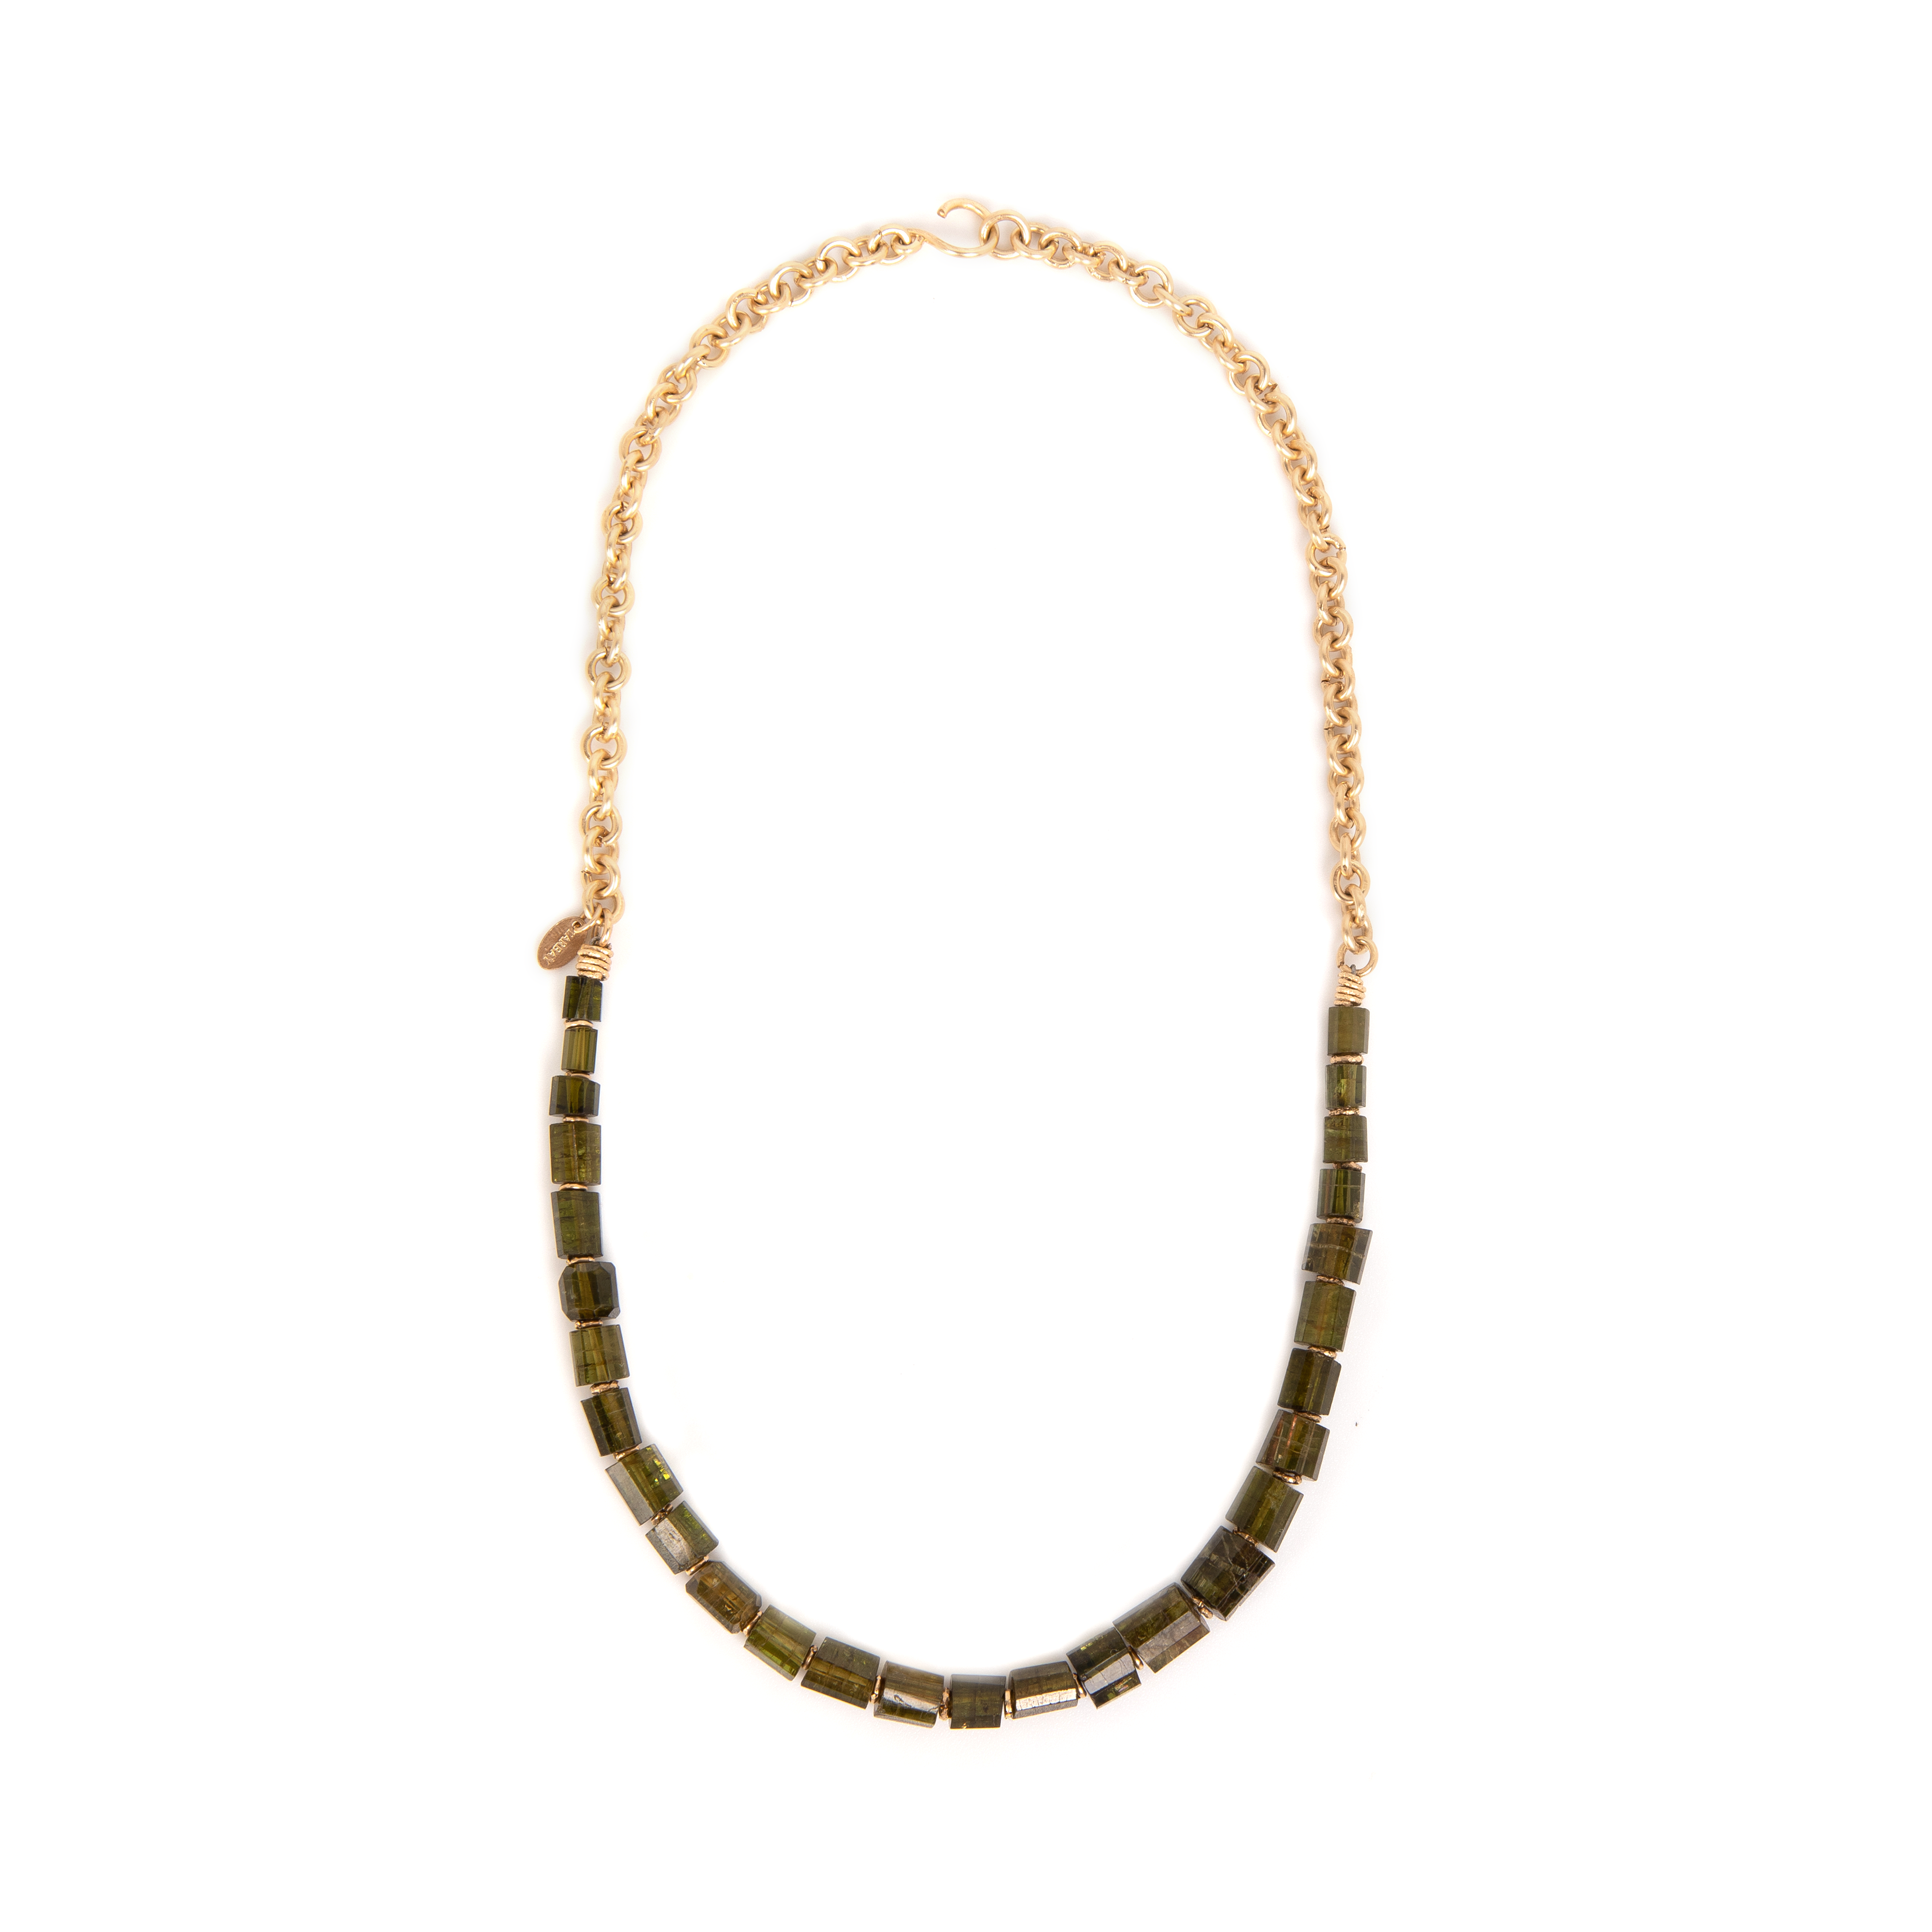 Isabel Necklace #1 (45cm) - Green Tourmaline Necklaces TARBAY   